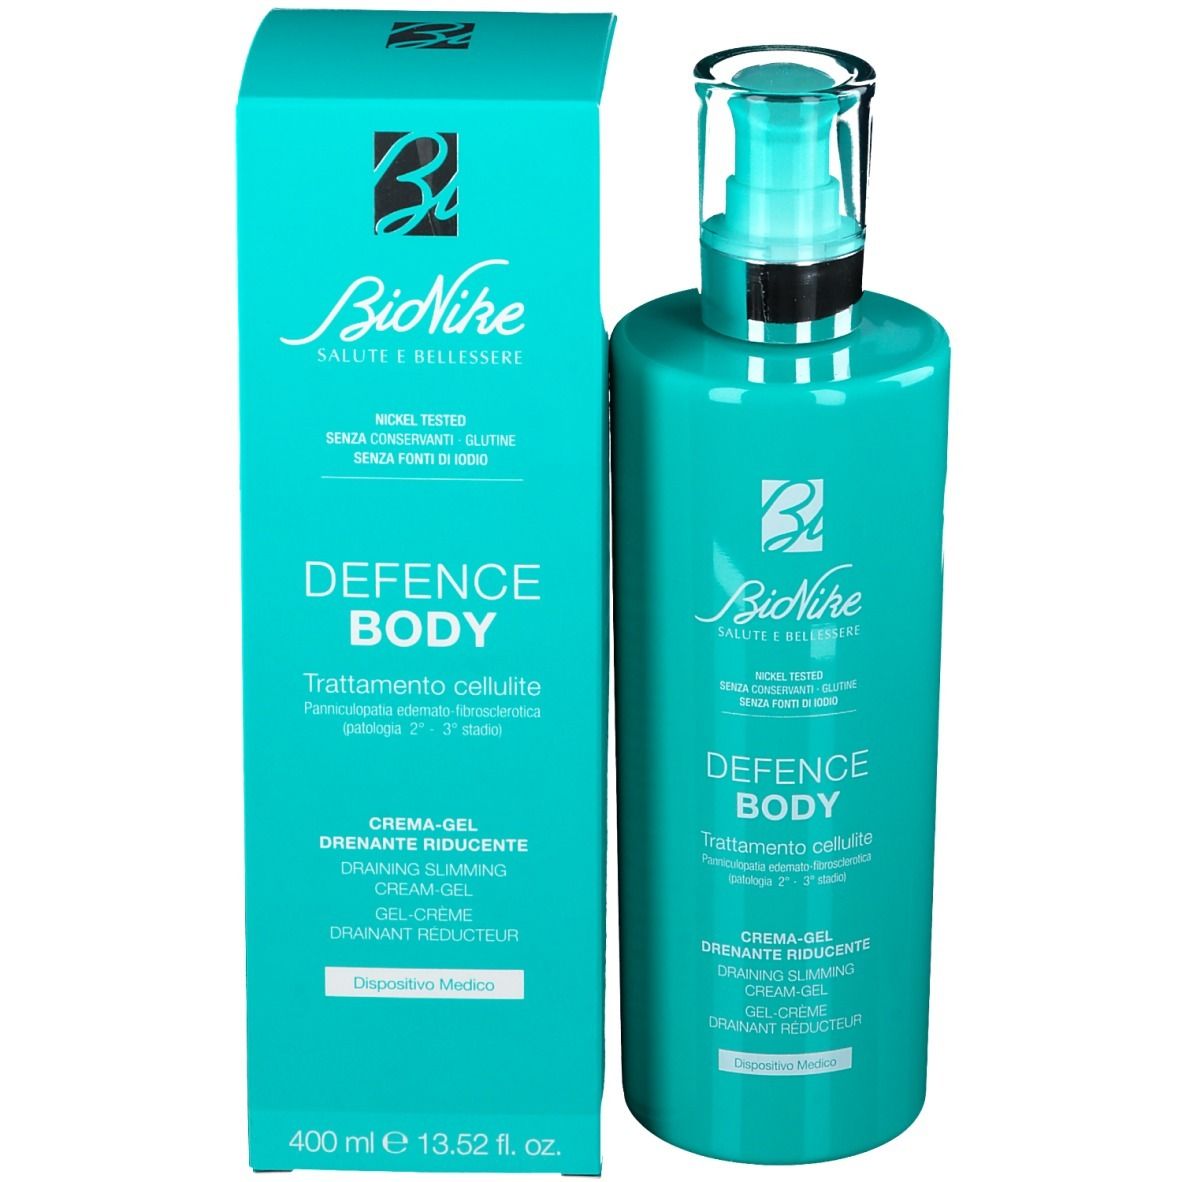 BioNike Defence Body Anticellulite